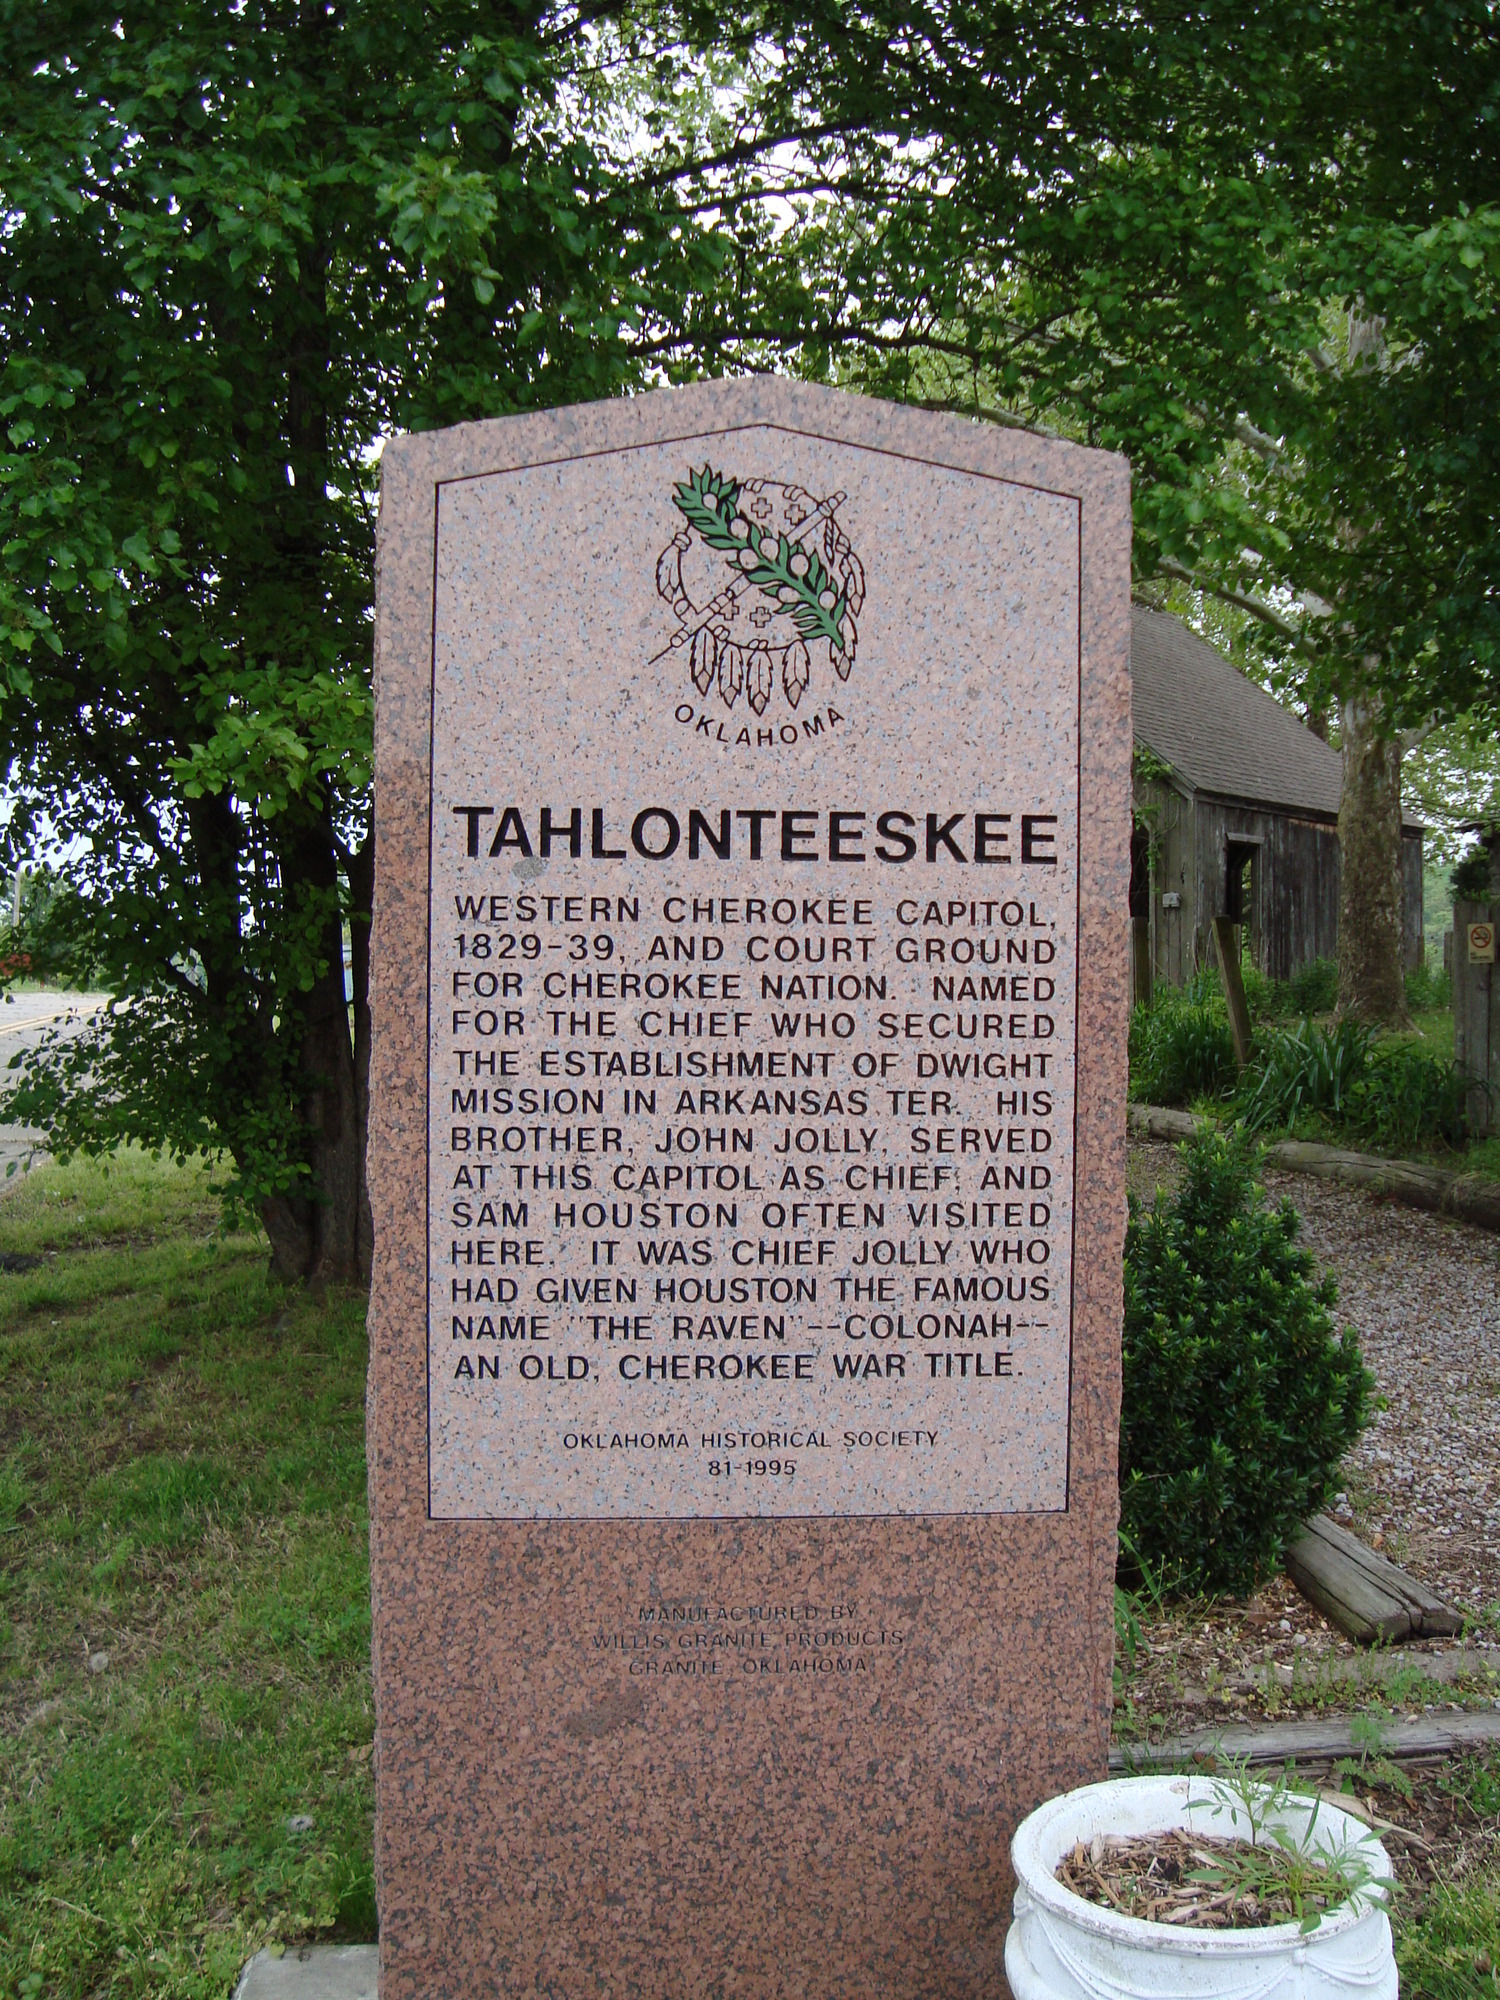 An Oklahoma Historical Society marker at the Tahlonteeskee museum and visitor center in Gore, Oklahoma